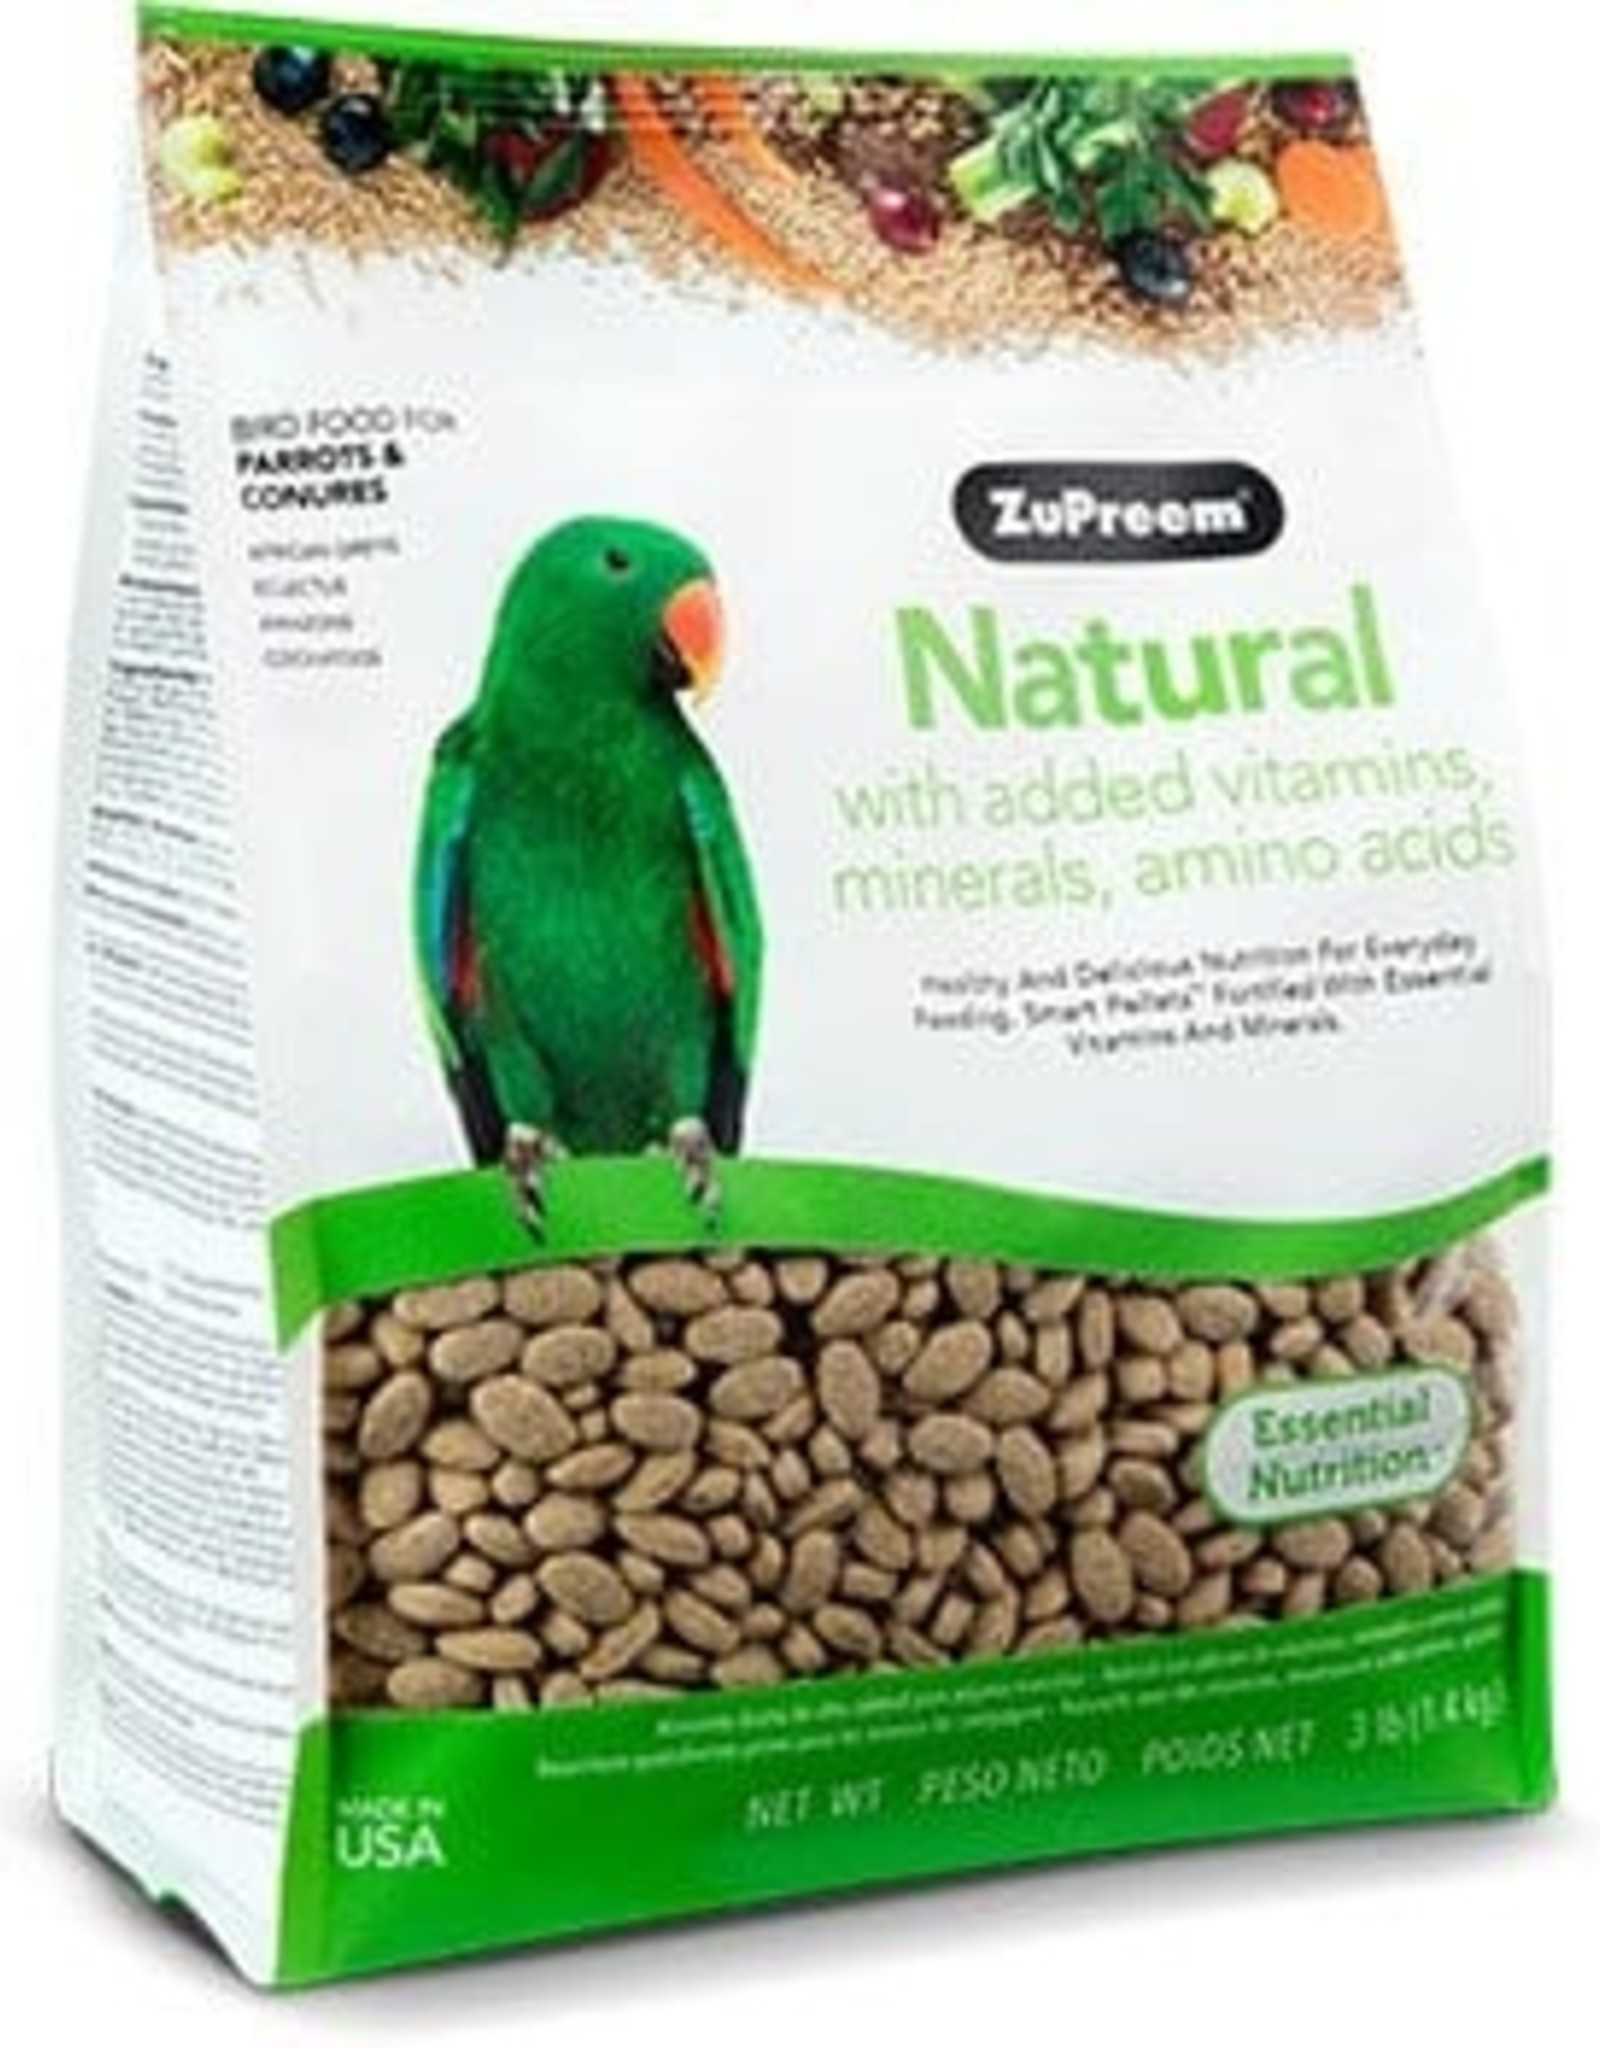 ZUPREEM ZUPREEM NATURAL PARROT & CONUTE 2.5LBS